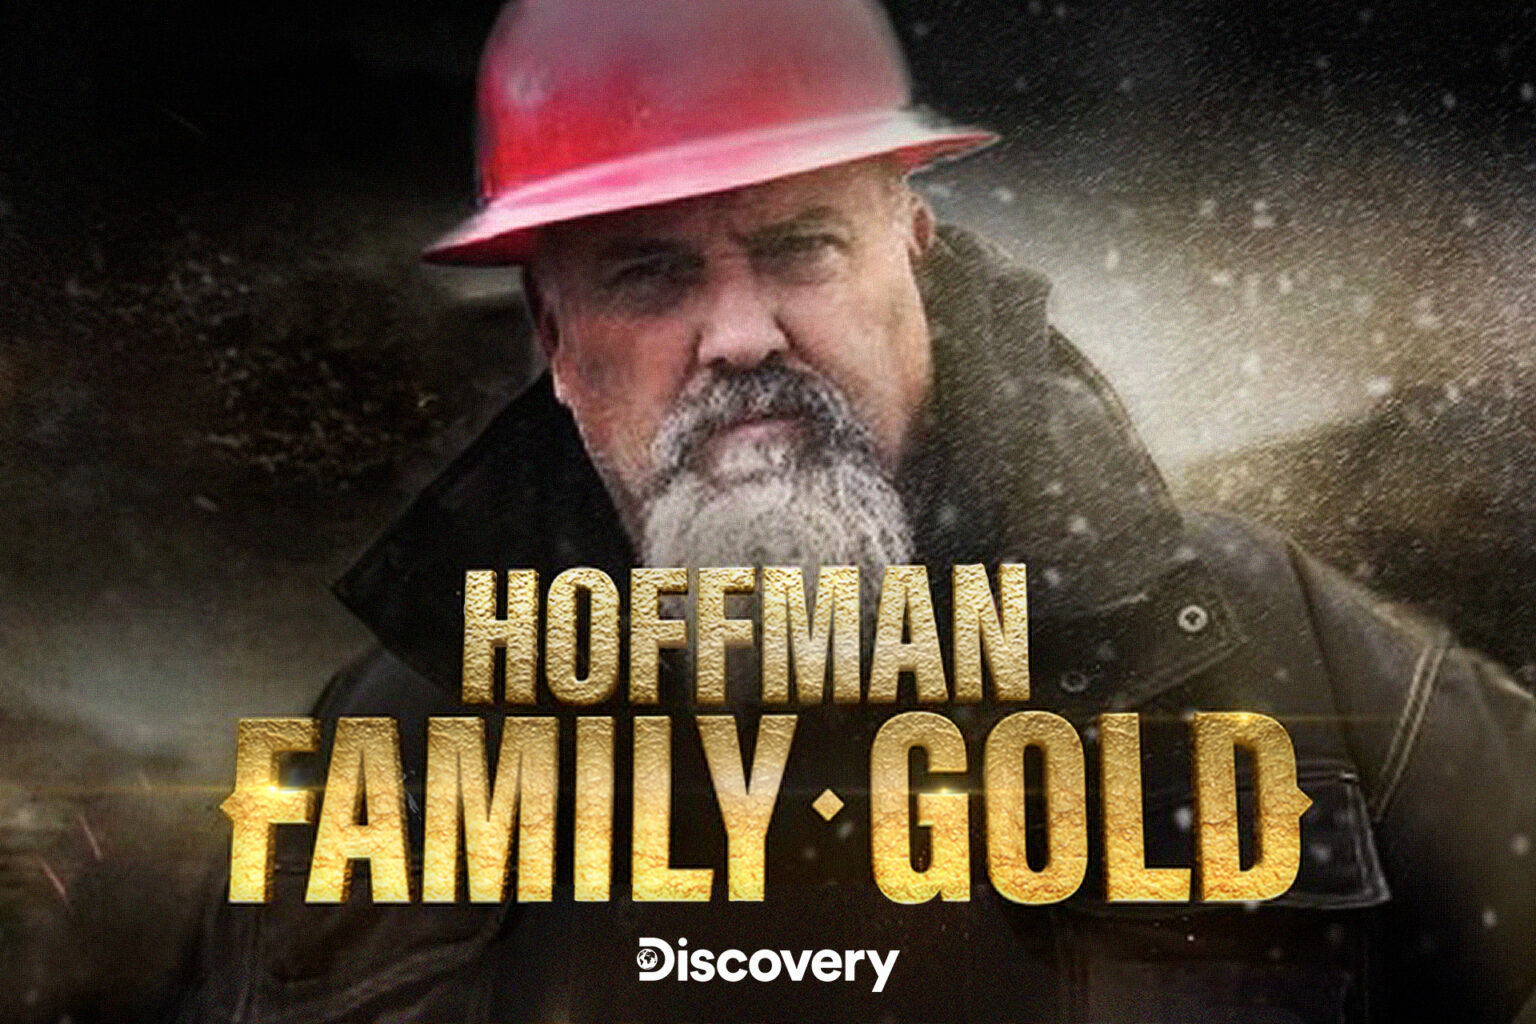 Hoffman Family Gold Adkins Publicity